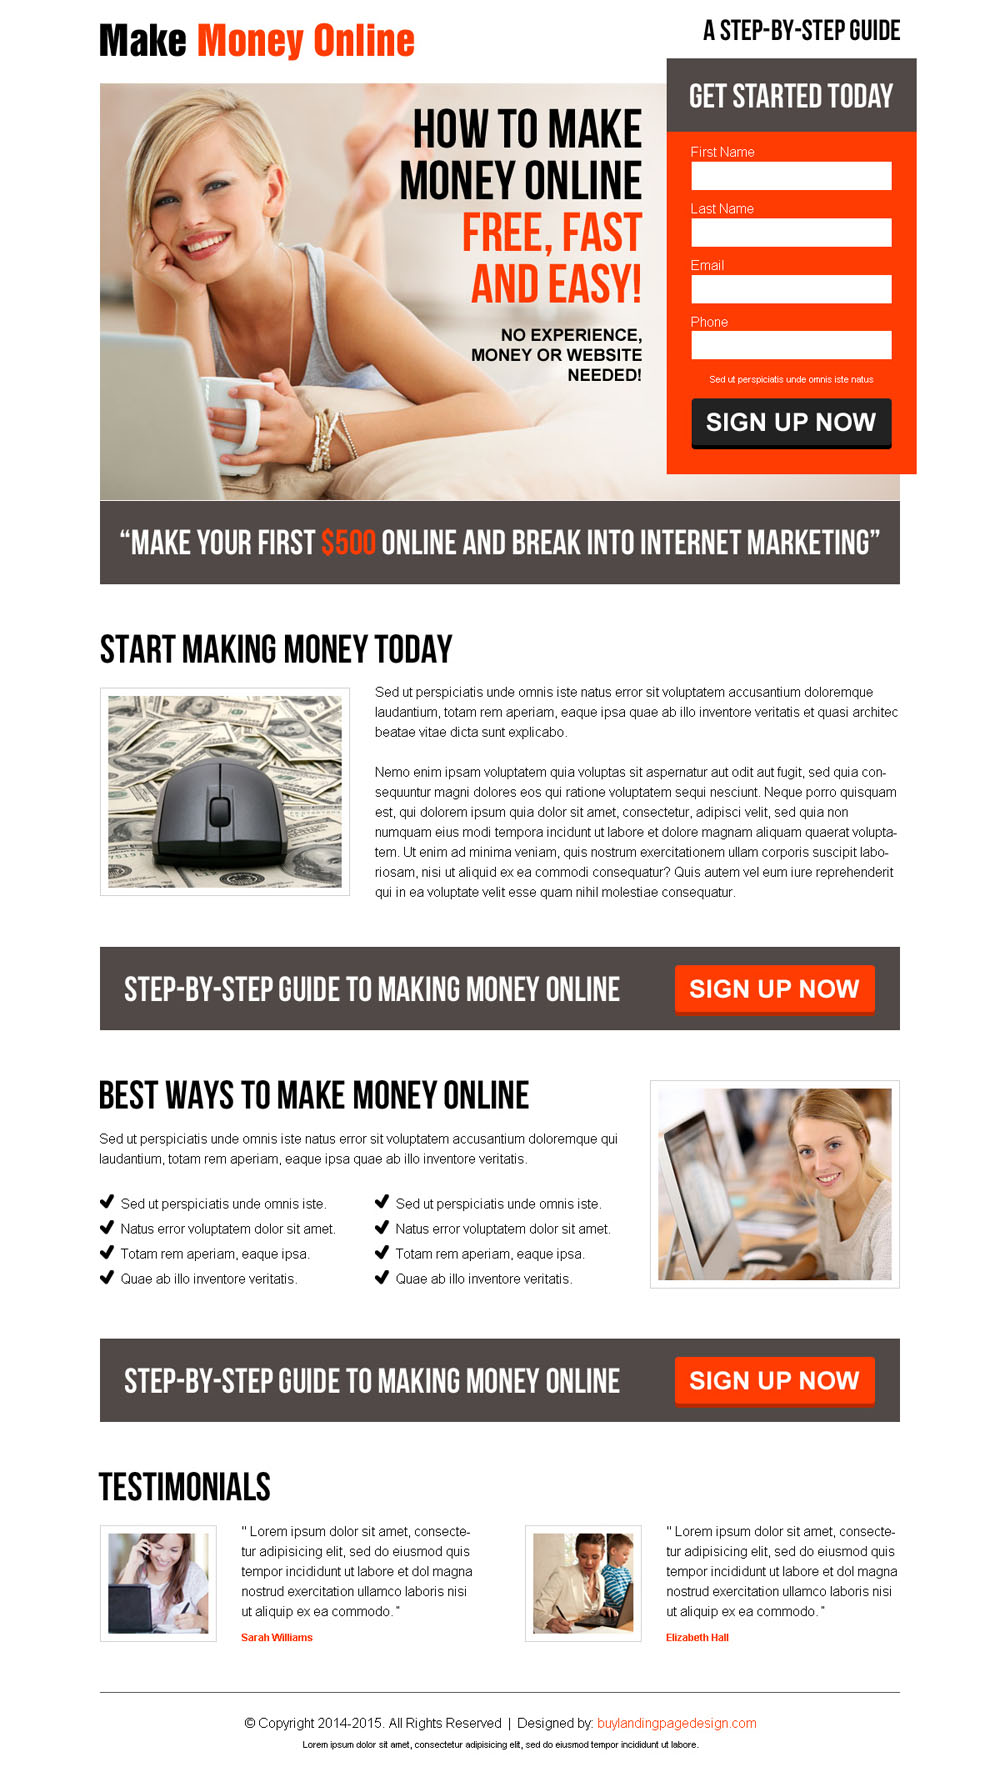 free-fast-and-easy-make-money-online-lead-capture-landing-page-design-templates-020